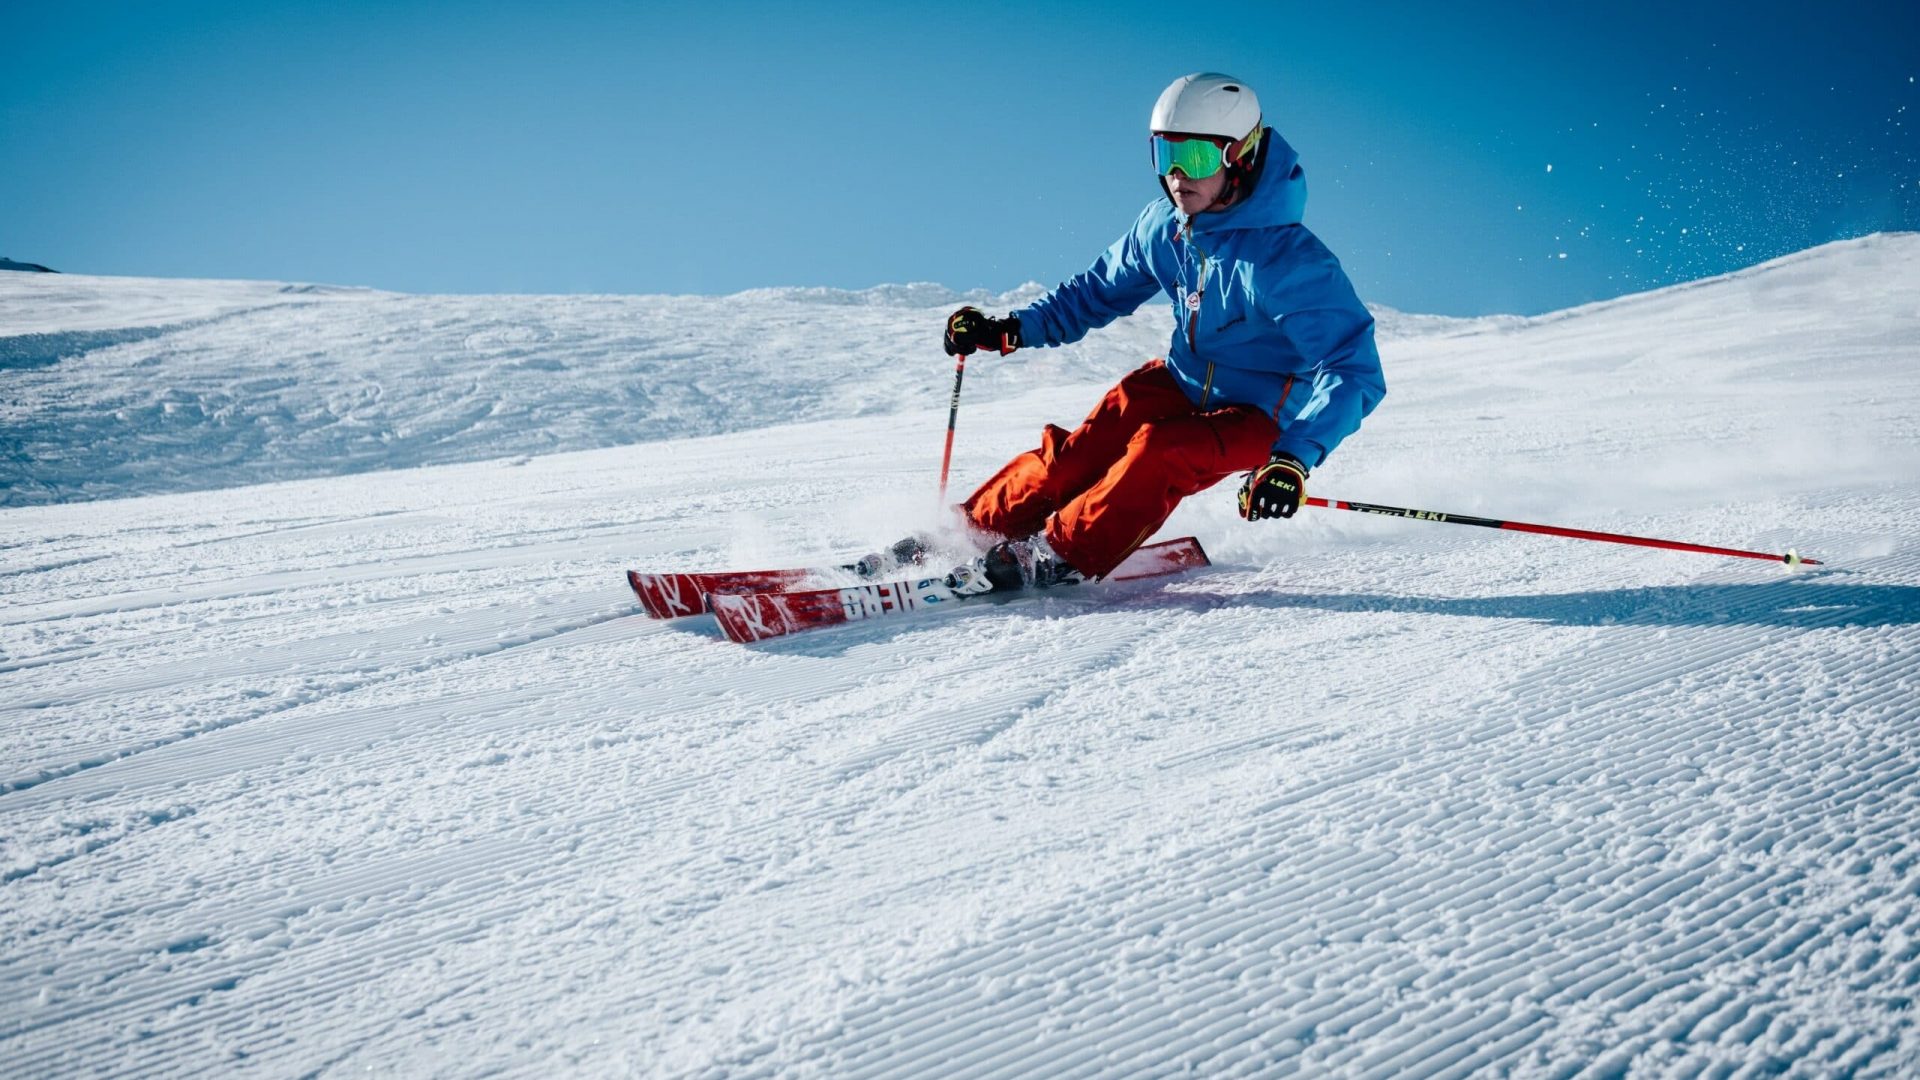 Person skiing downhill amidst blue skies